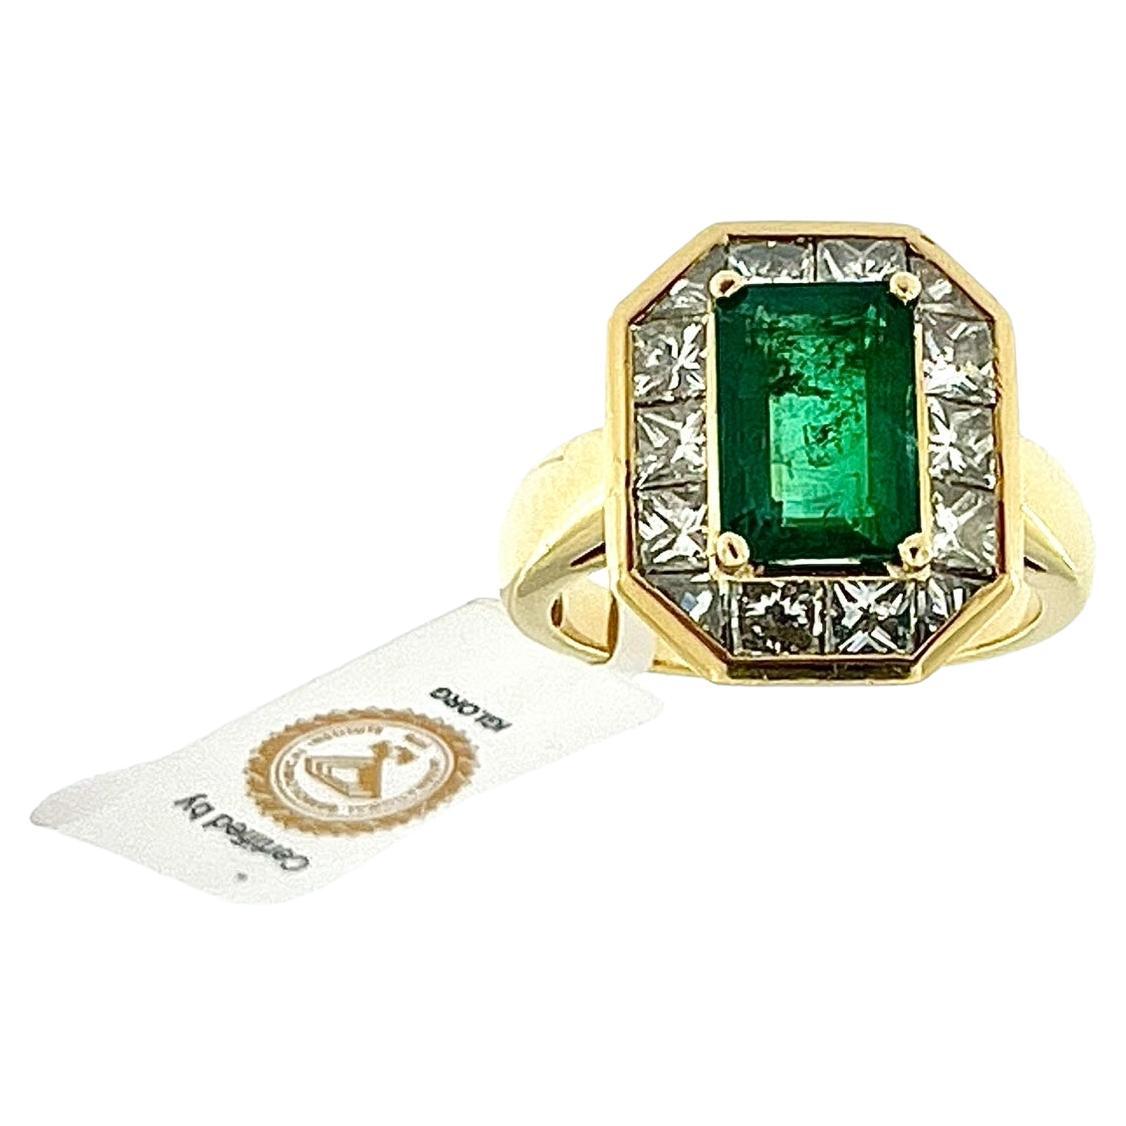 Retro Yellow Gold French Cocktail Ring with Diamonds and Emerald IGI Certified